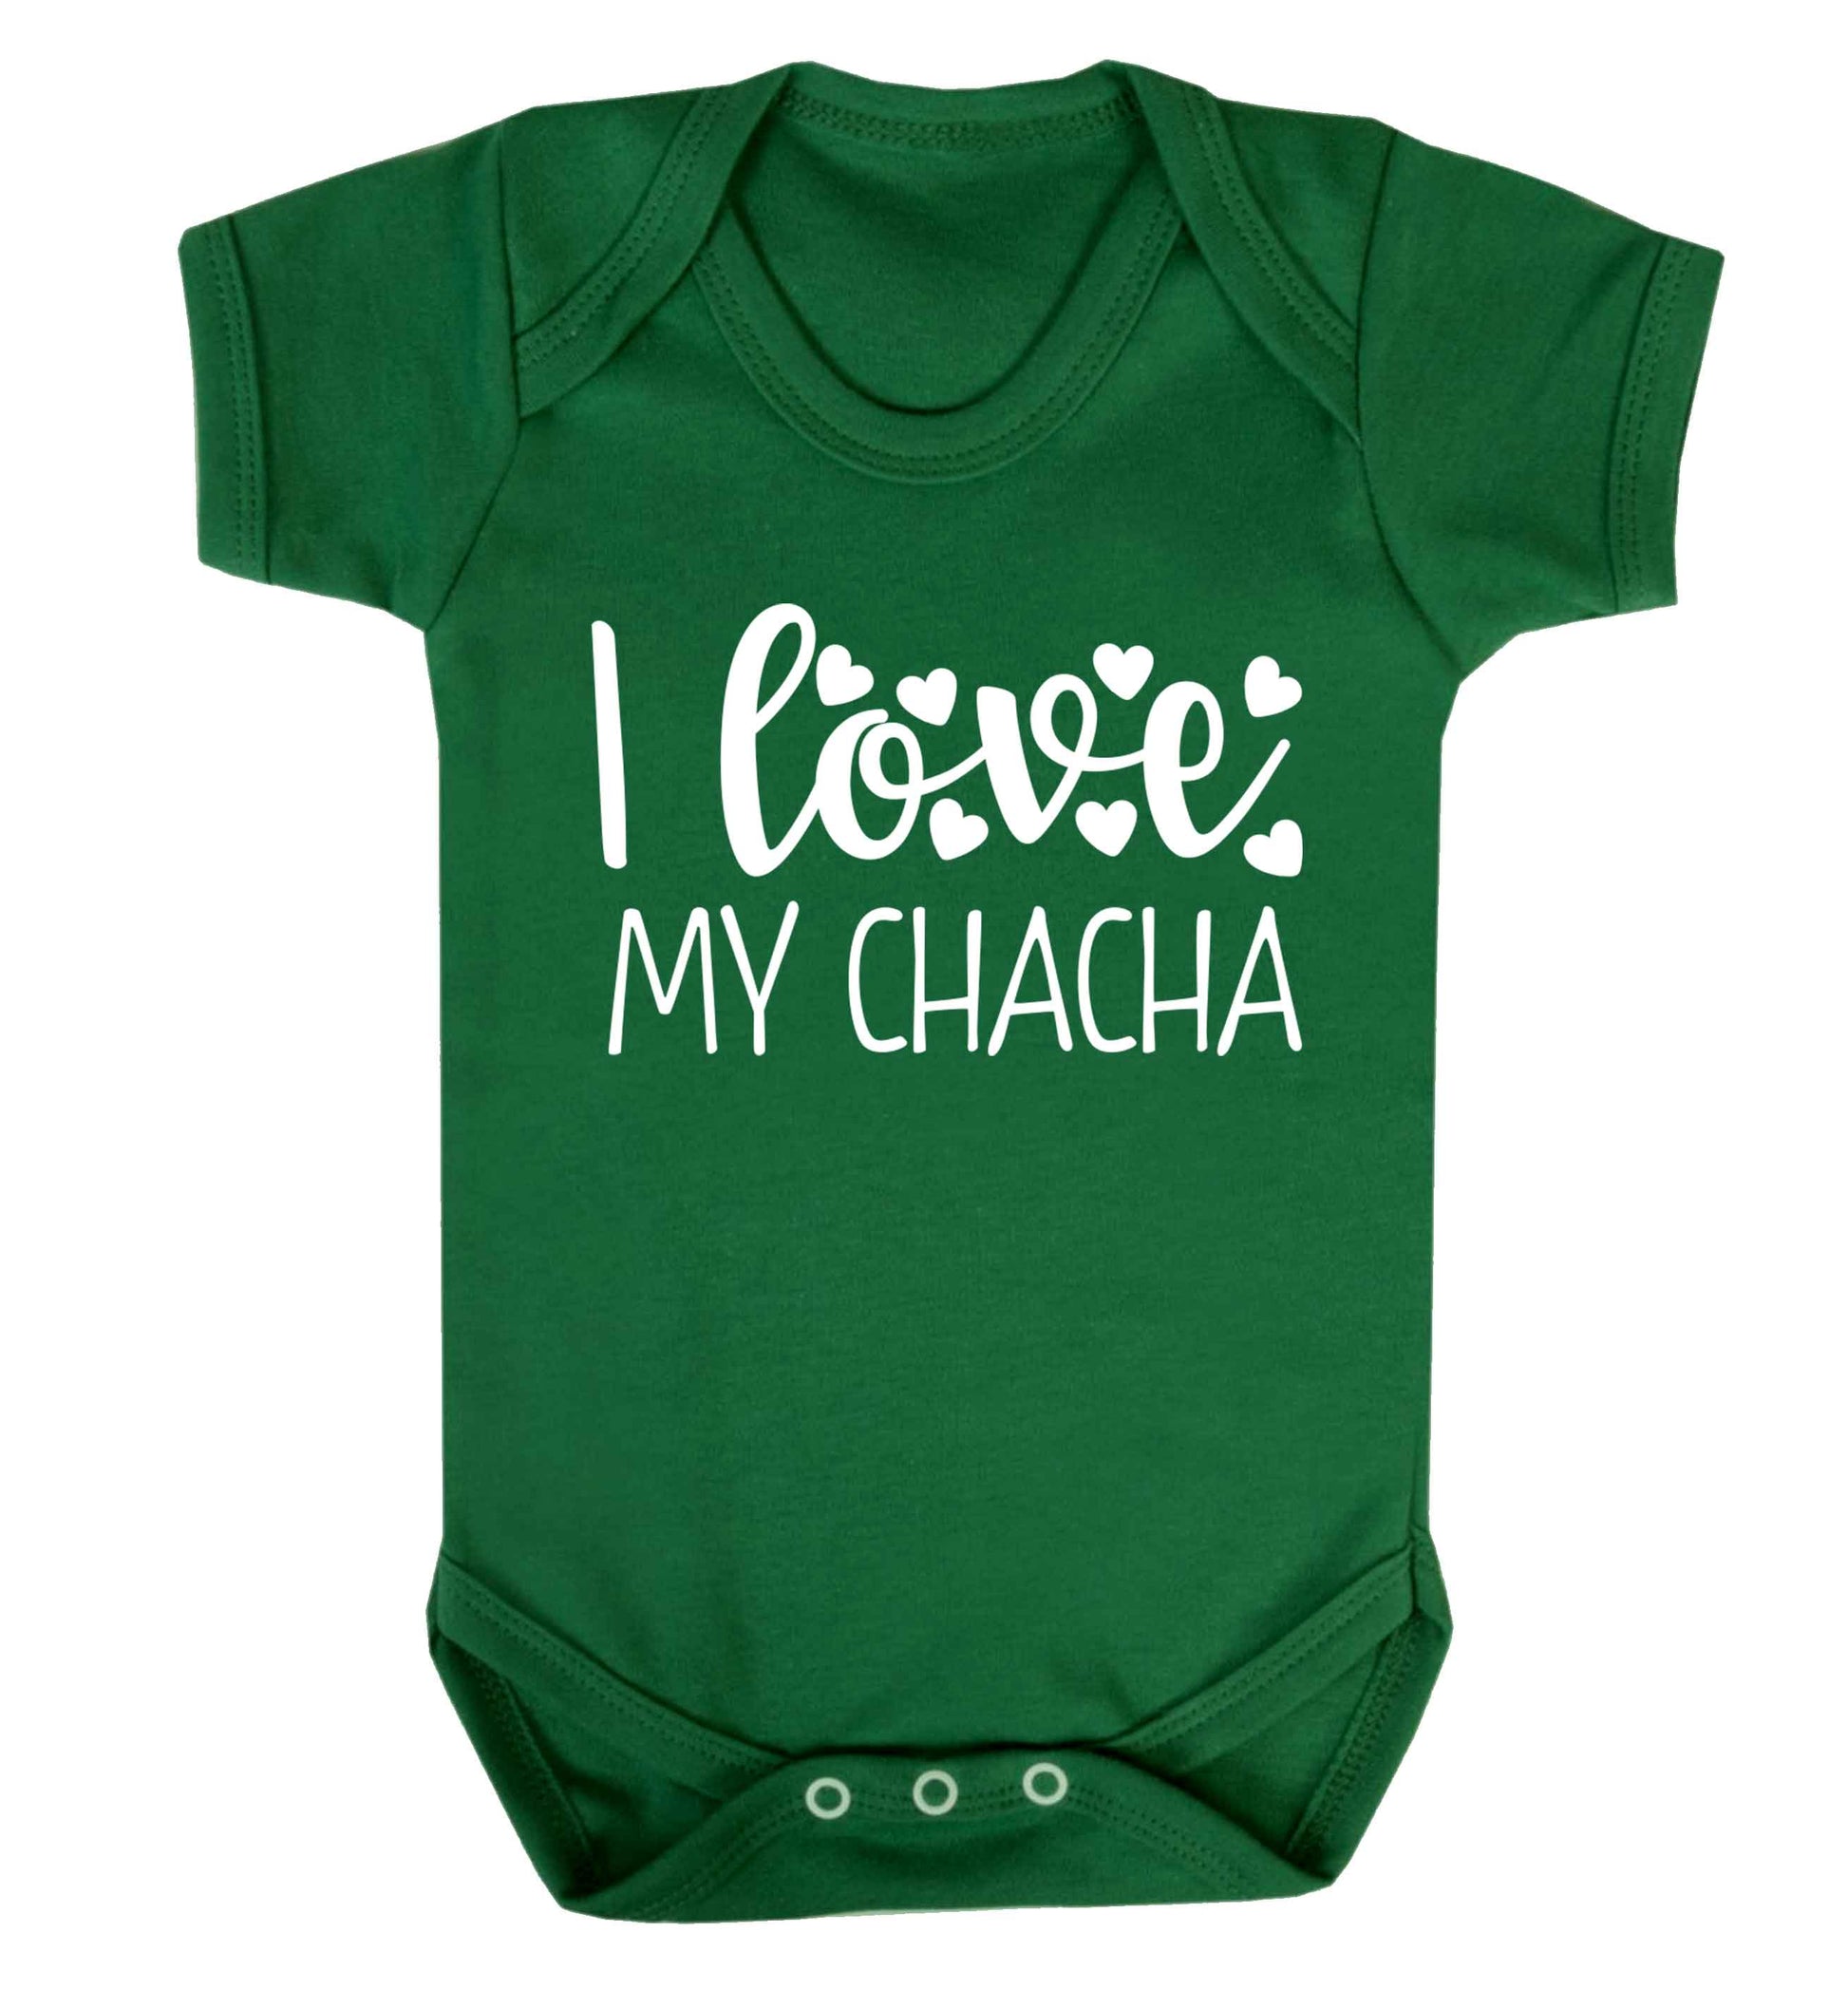 I love my chacha Baby Vest green 18-24 months